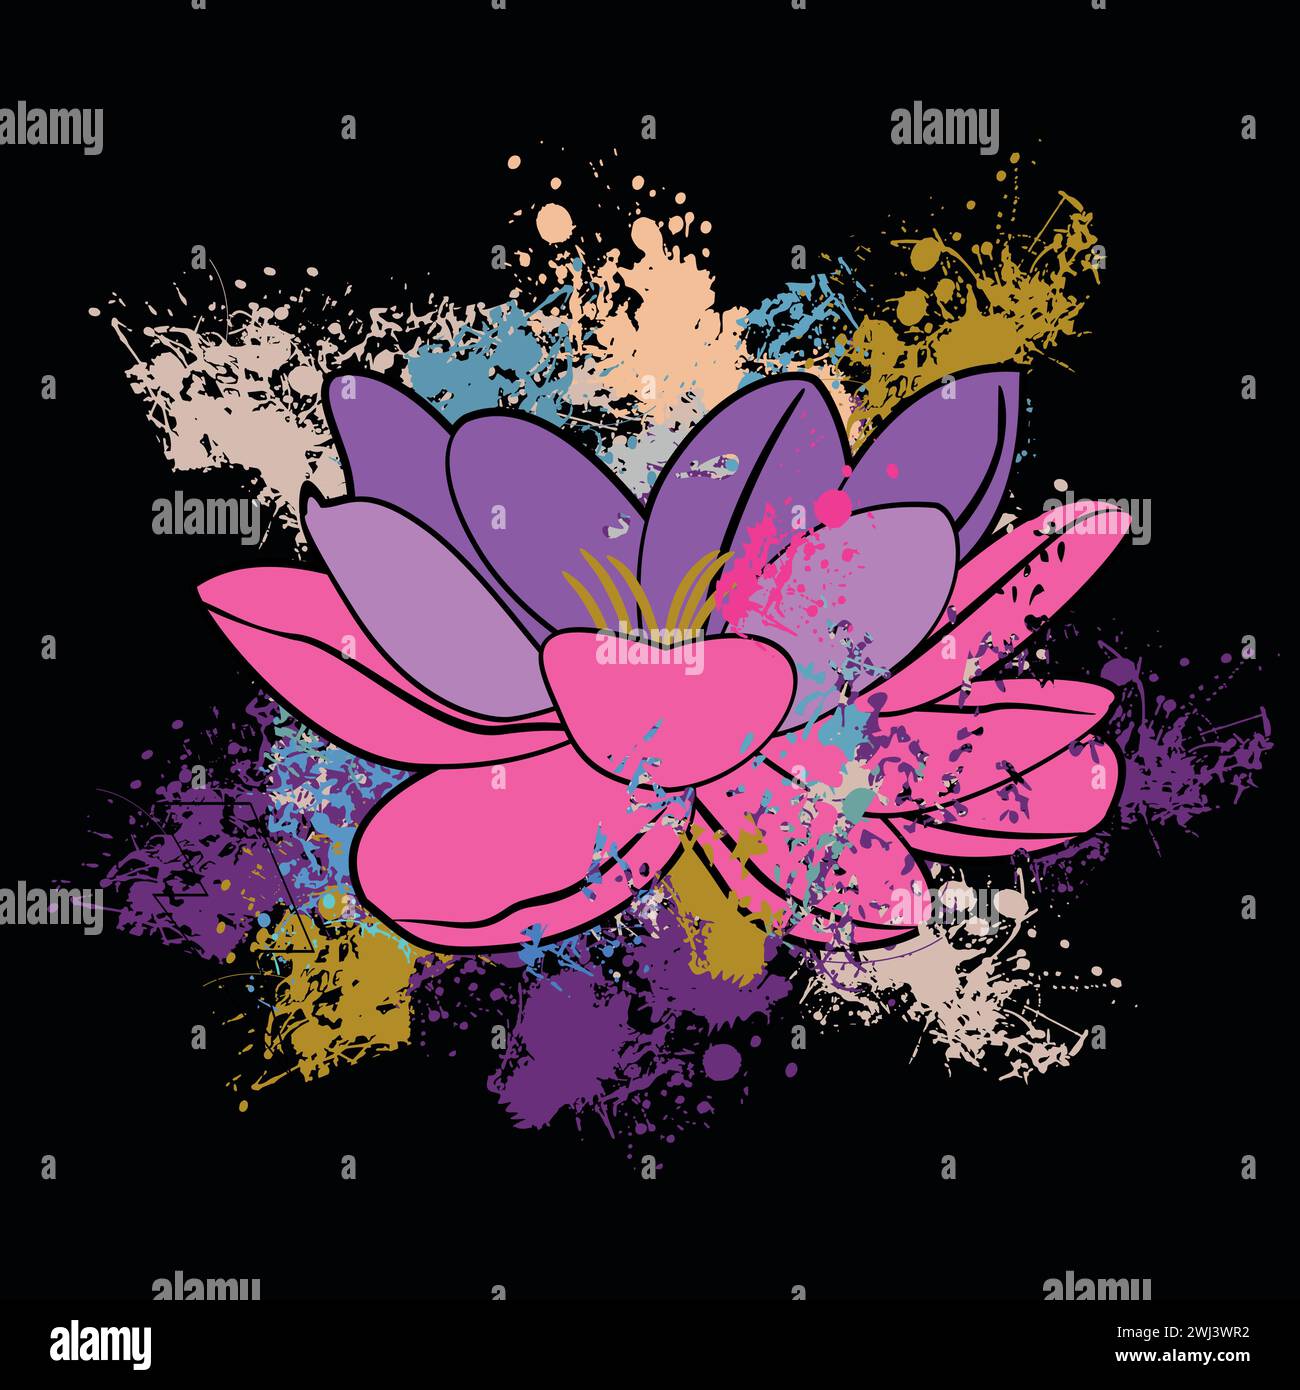 Lotus flower t-shirt design in pink tones on a black background. Illustration good for Buddhism and Hindu culture. Stock Vector